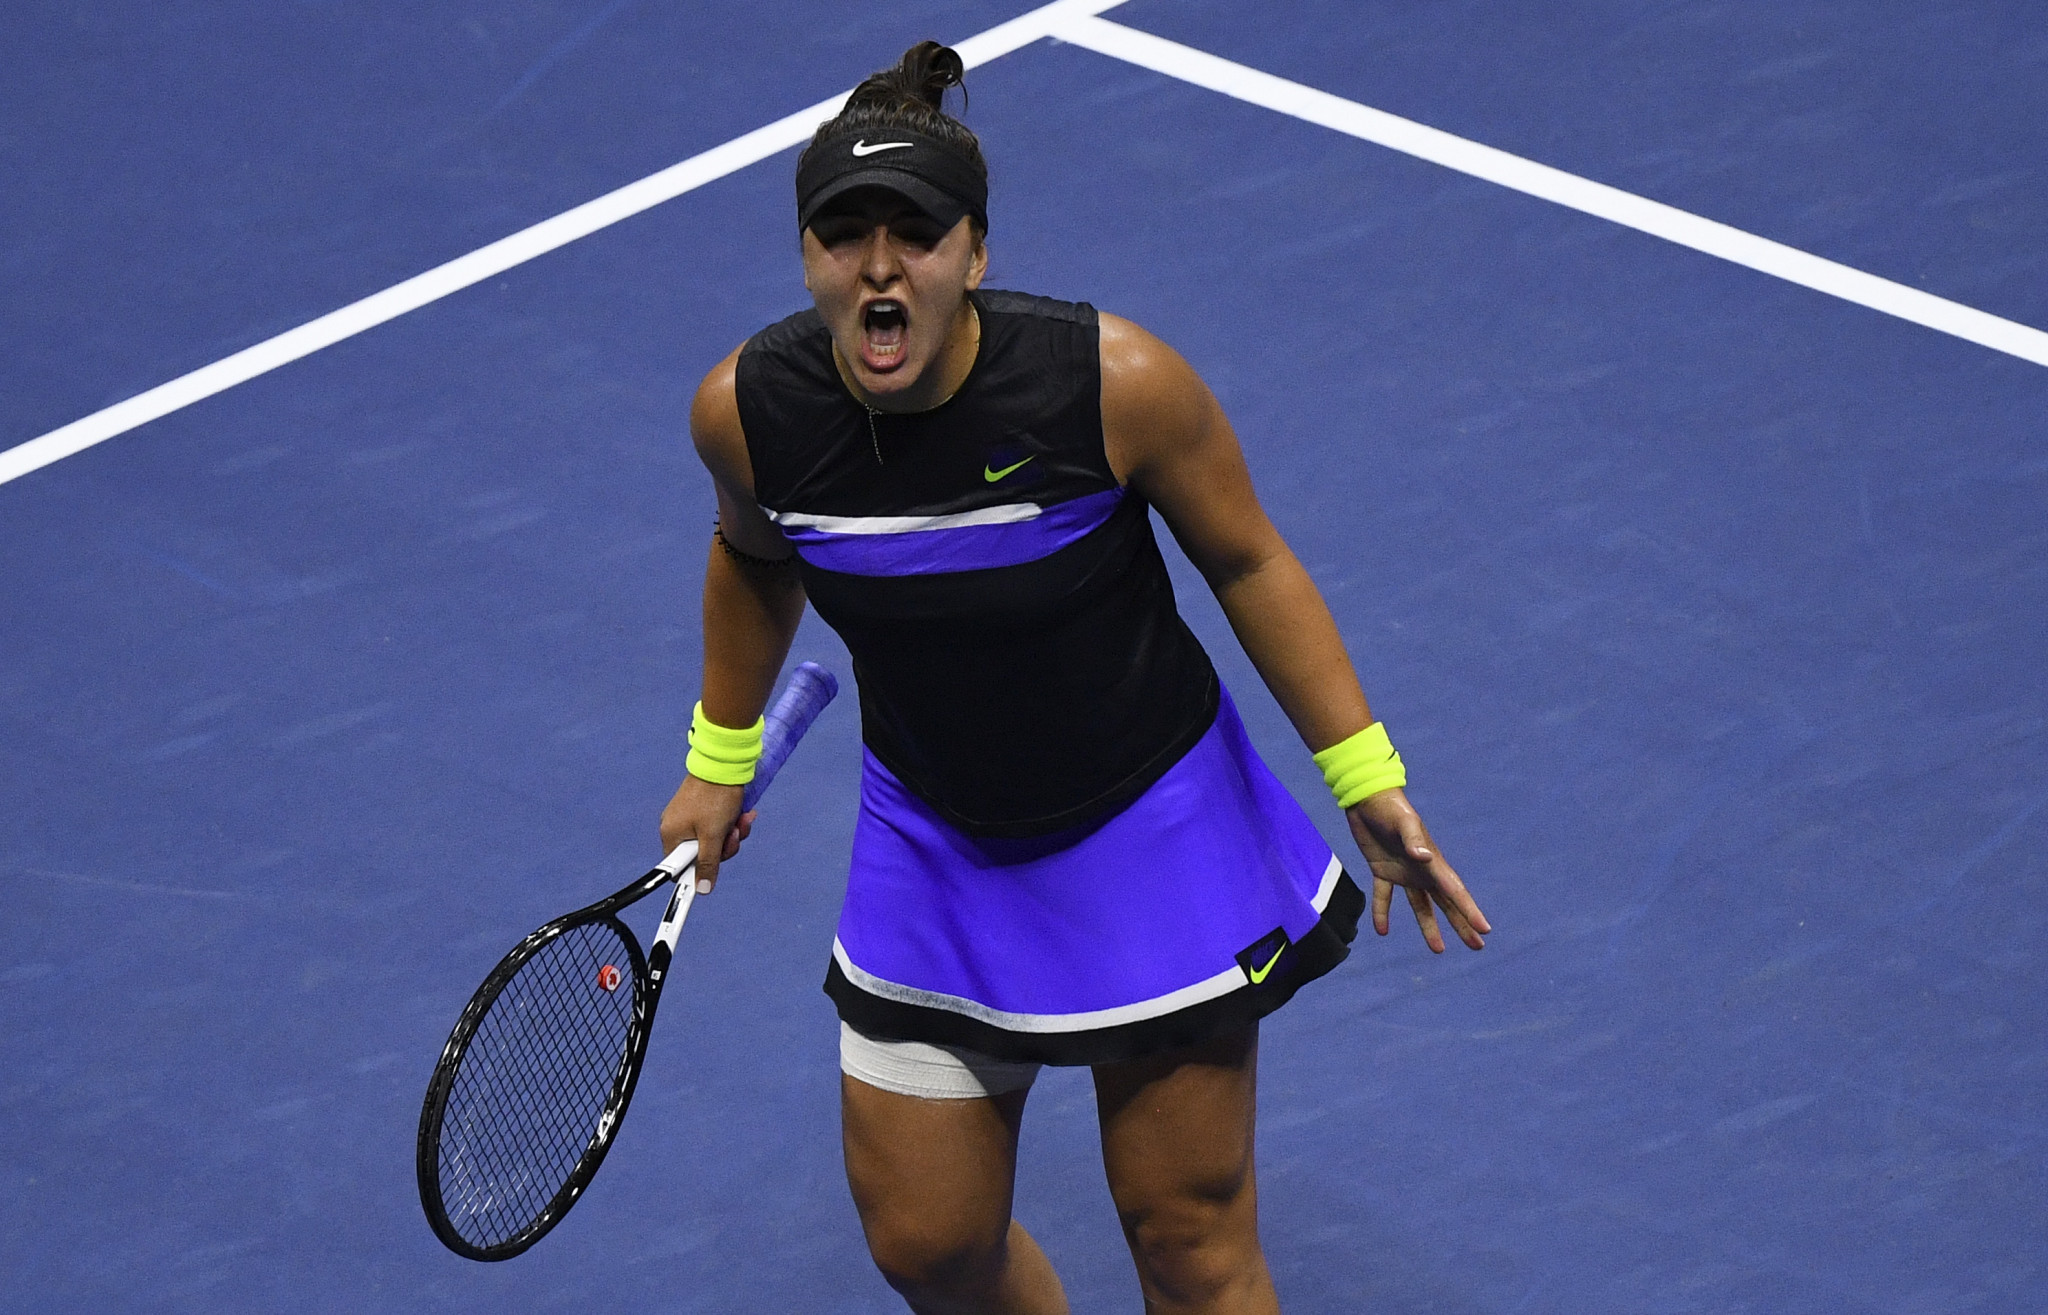 Canada's Bianca Andreescu continued her fine run to make the last four ©Getty Images